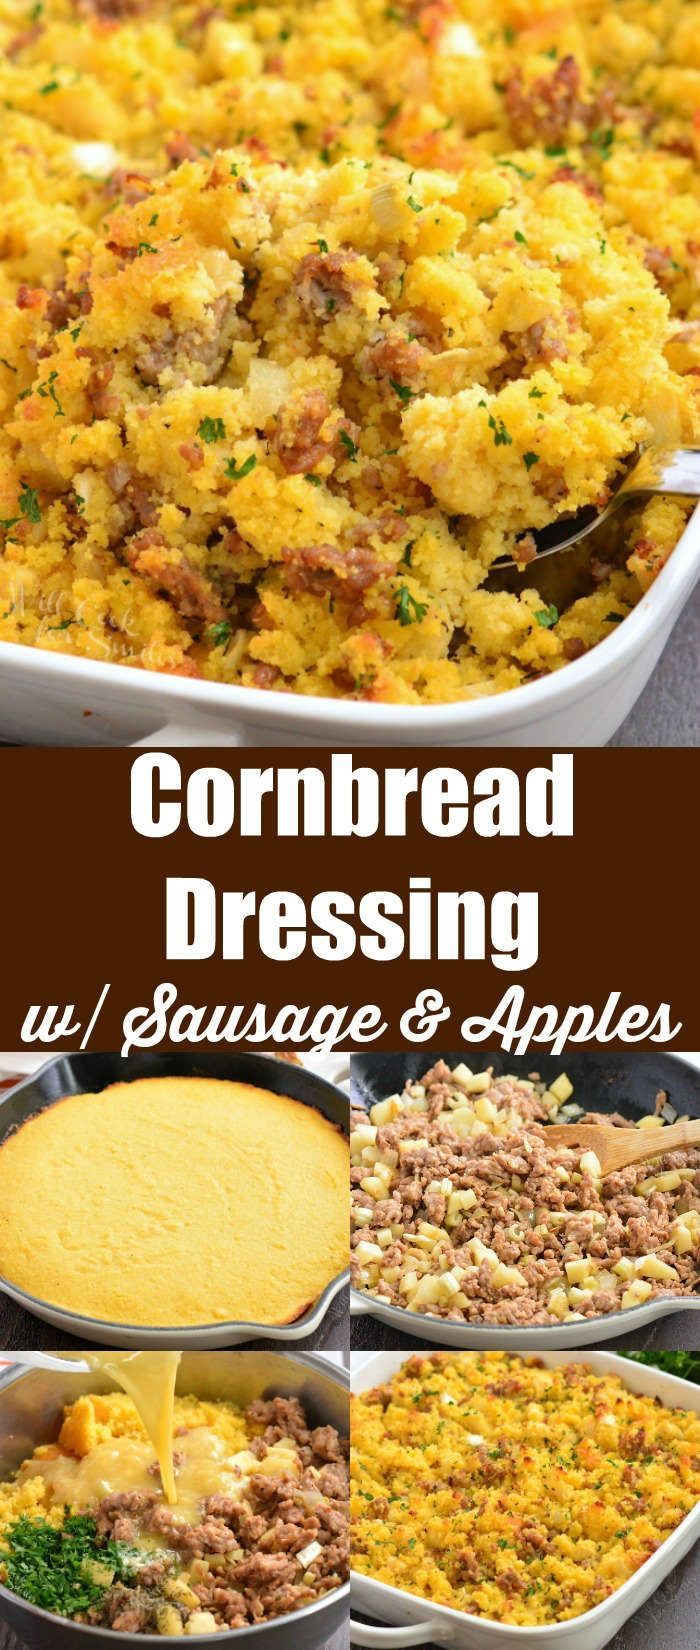 Cornbread Dressing with Sausage and Apples -   18 stuffing recipes for thanksgiving with sausage cornbread dressing ideas